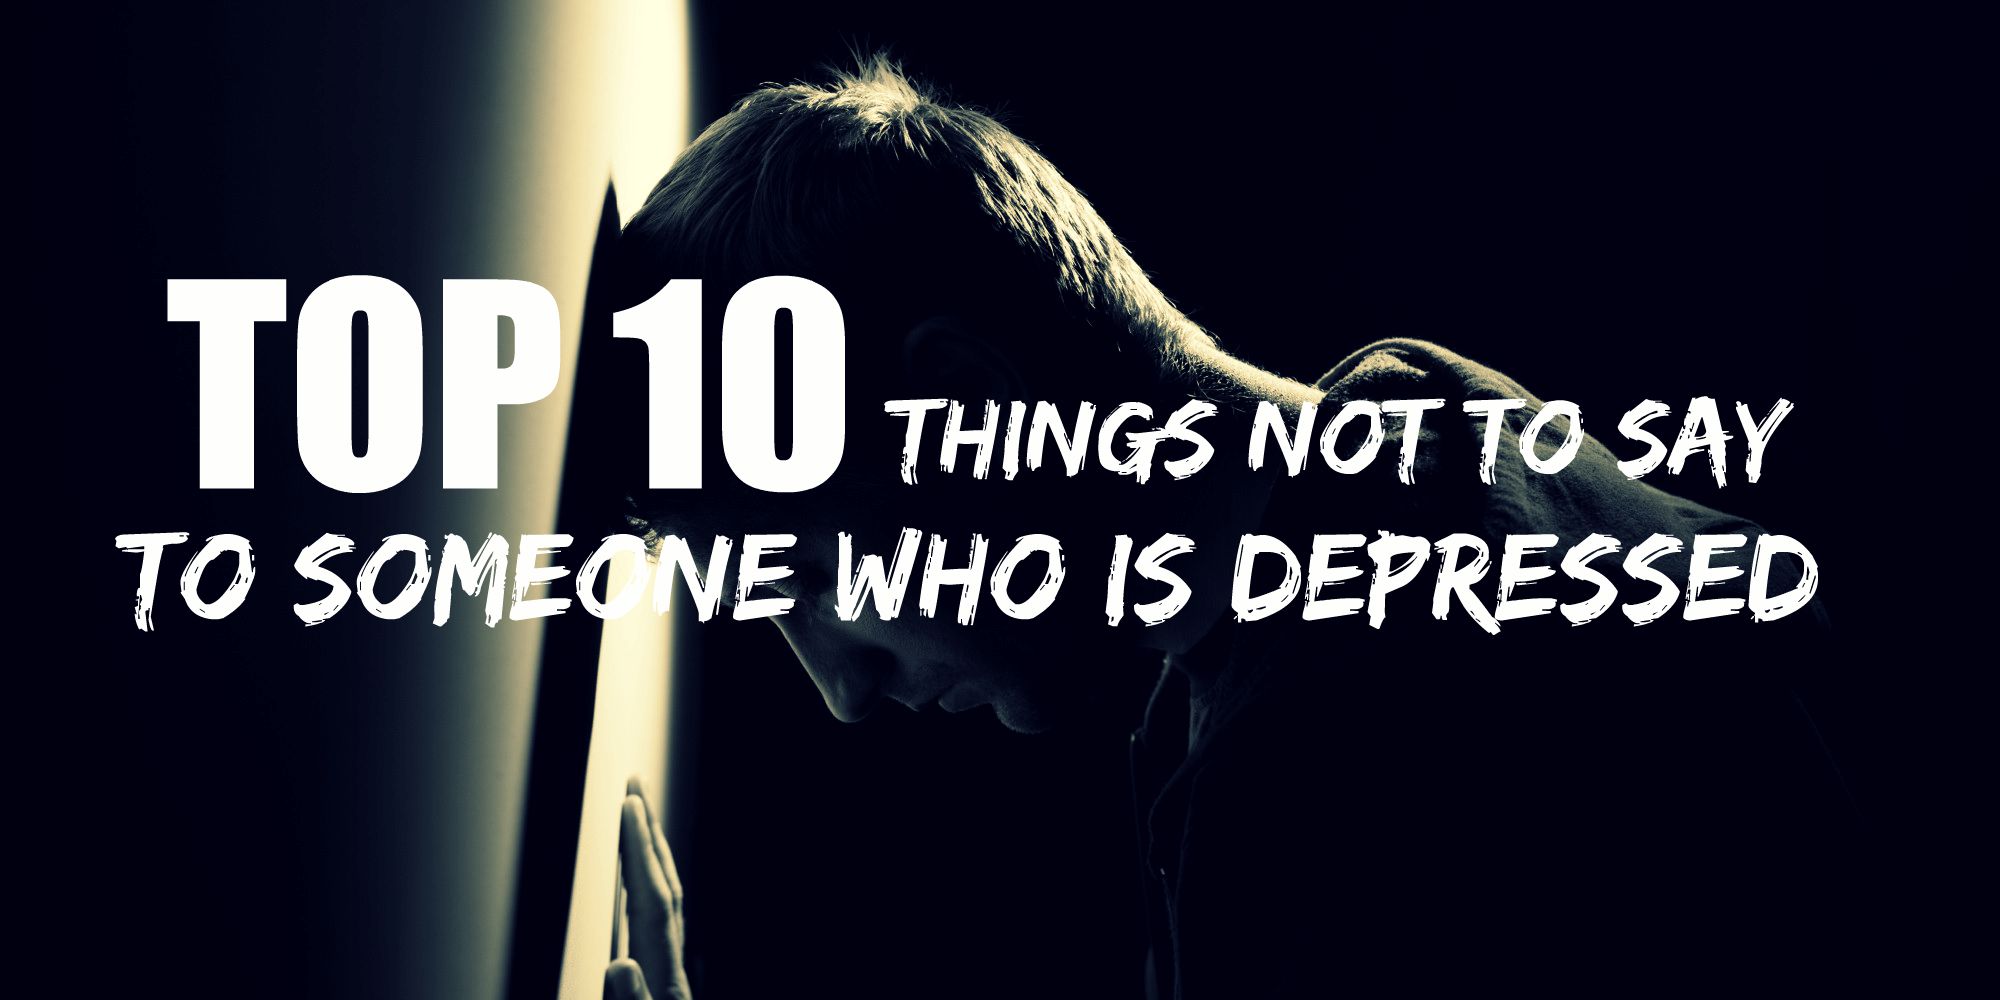 Depressed should person say to you things never a What Not